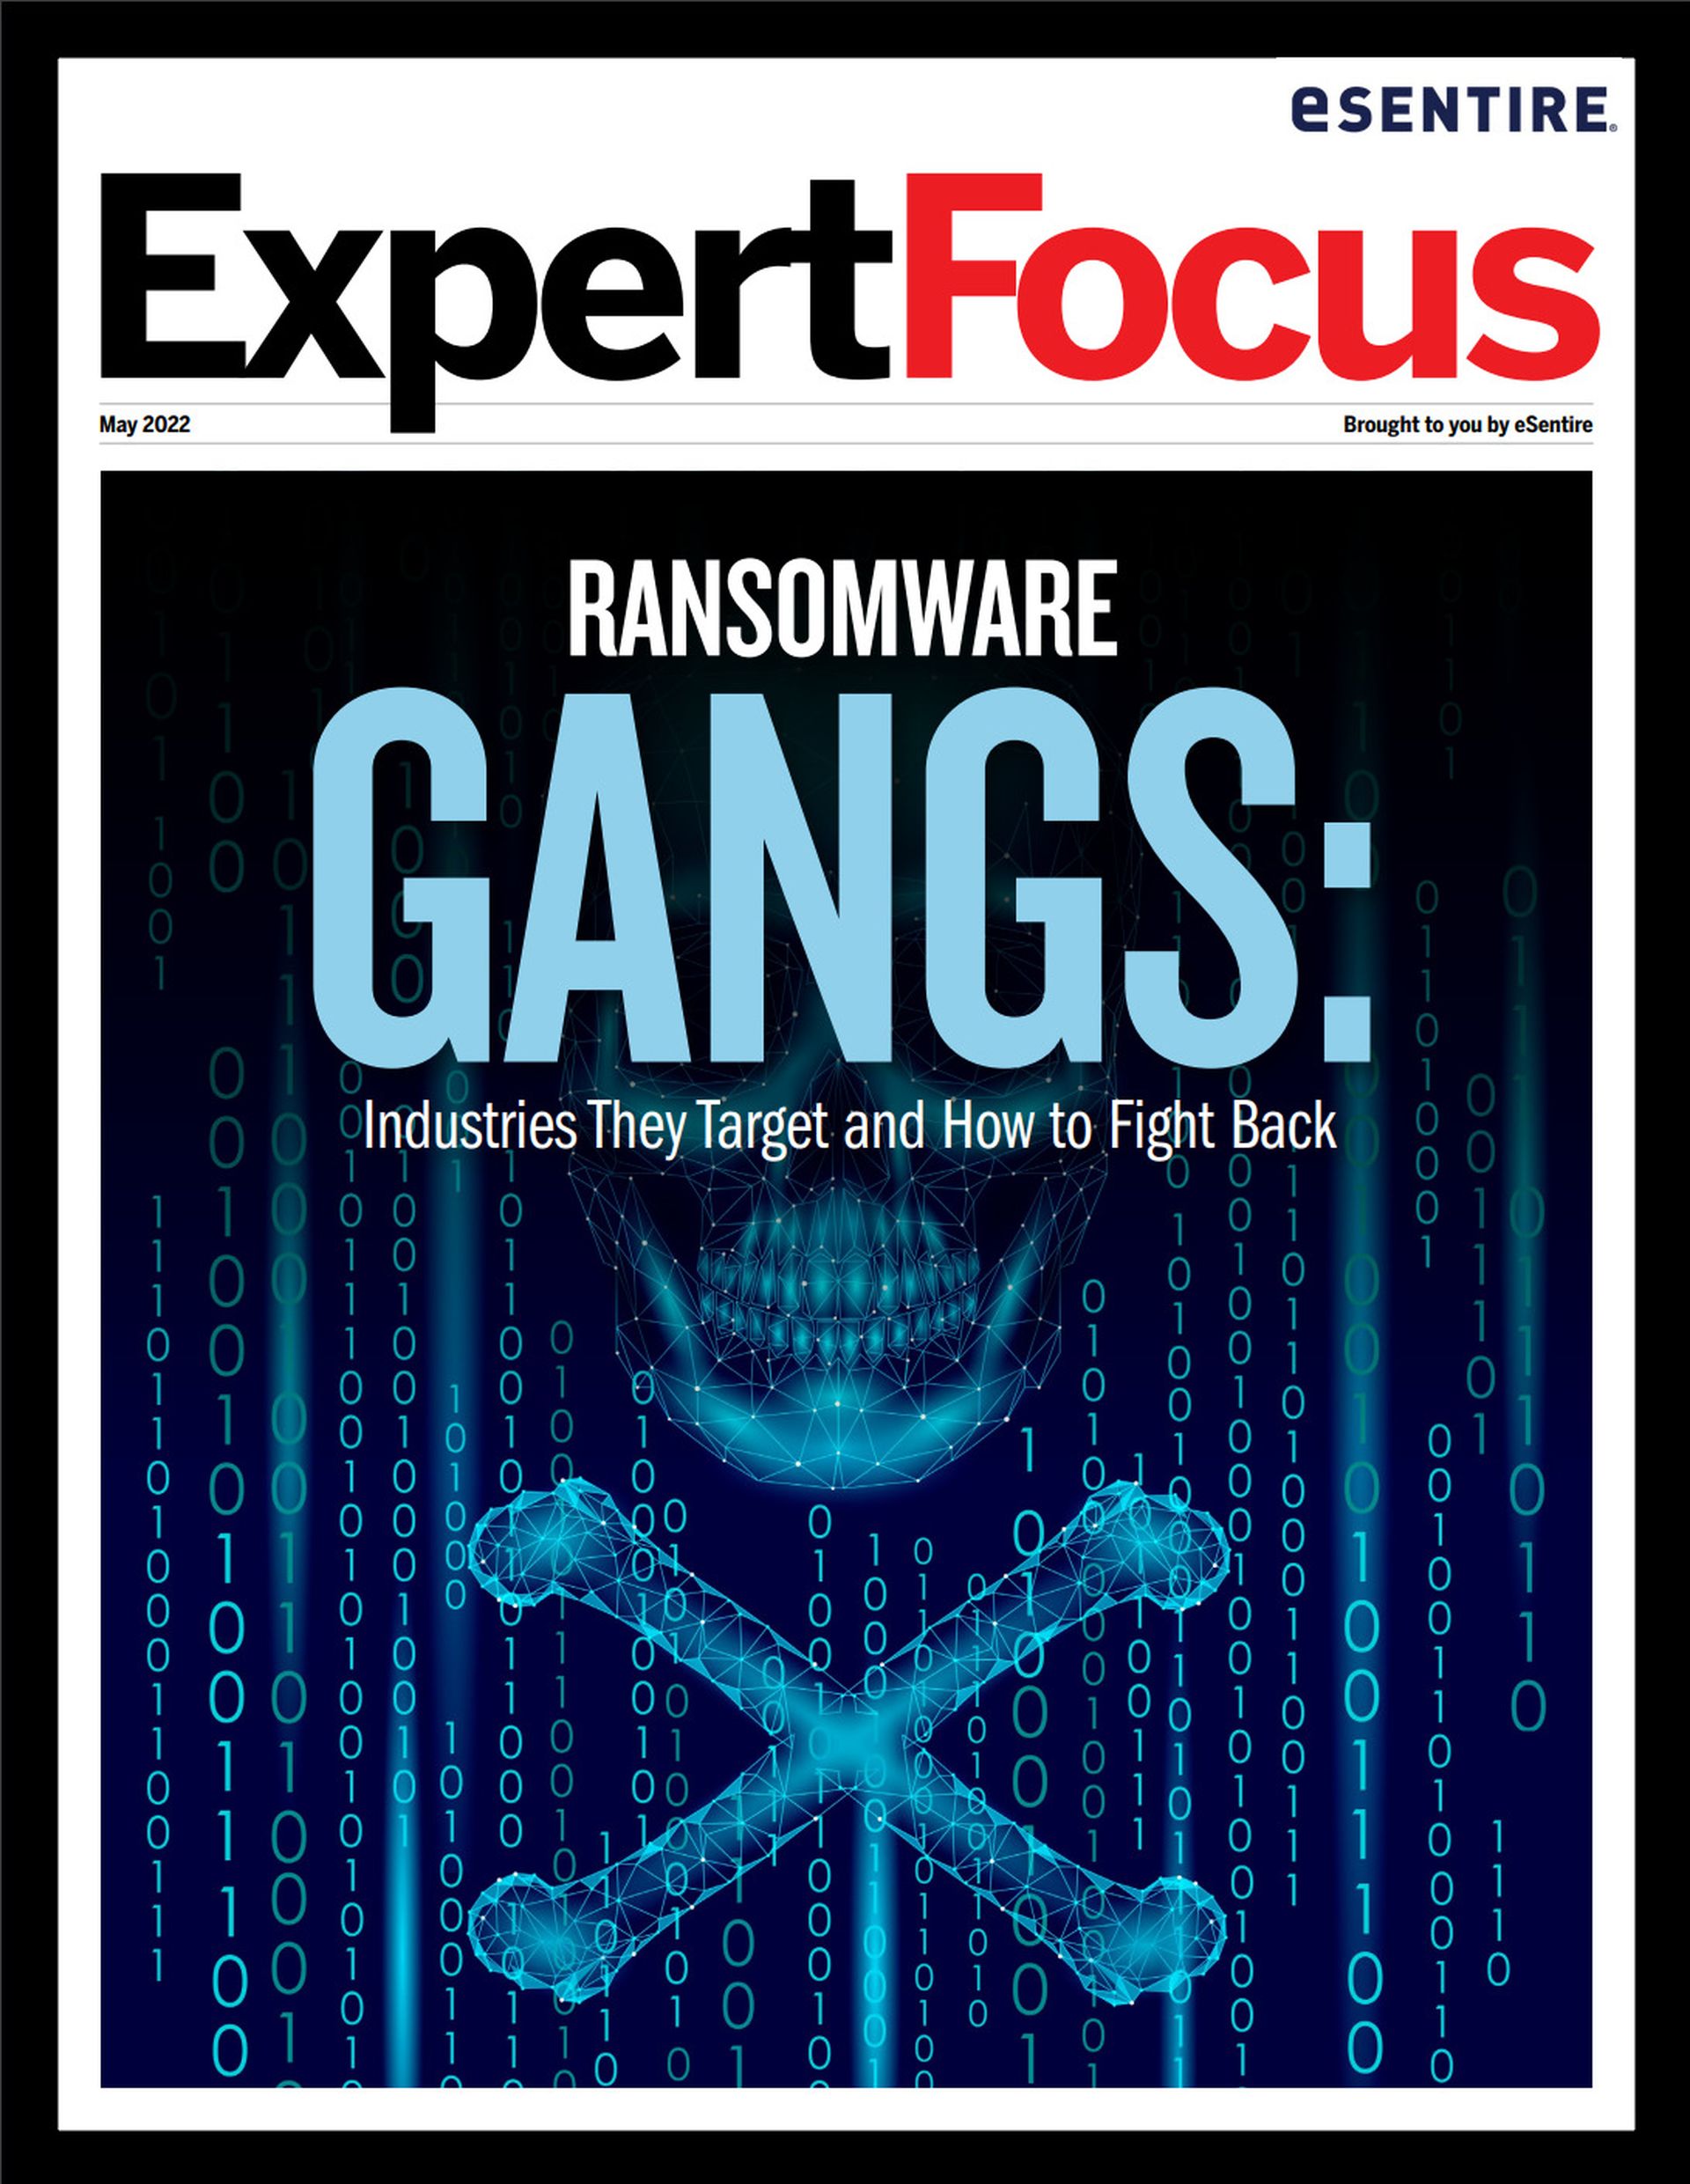 Ransomware Gangs, Industries They Target and How to Fight Back